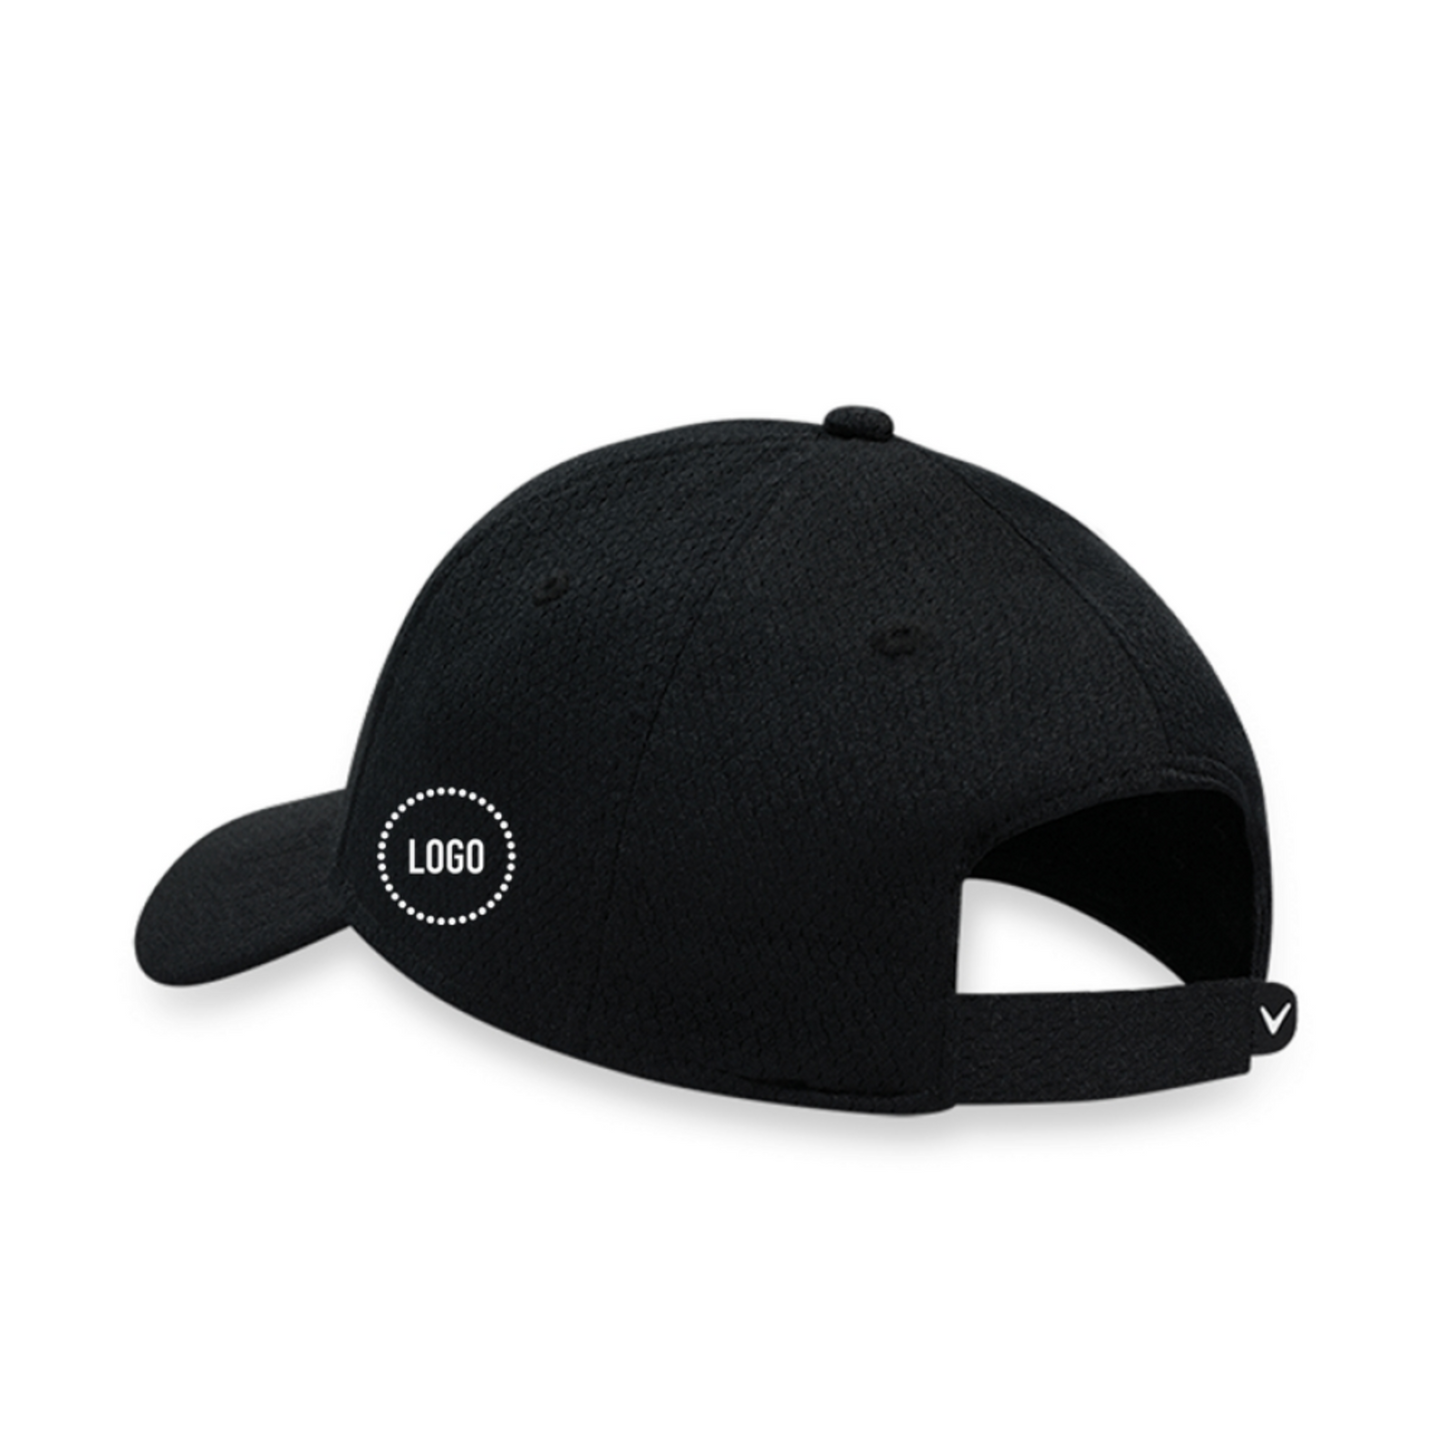 Callaway Performance Side Crested Cap